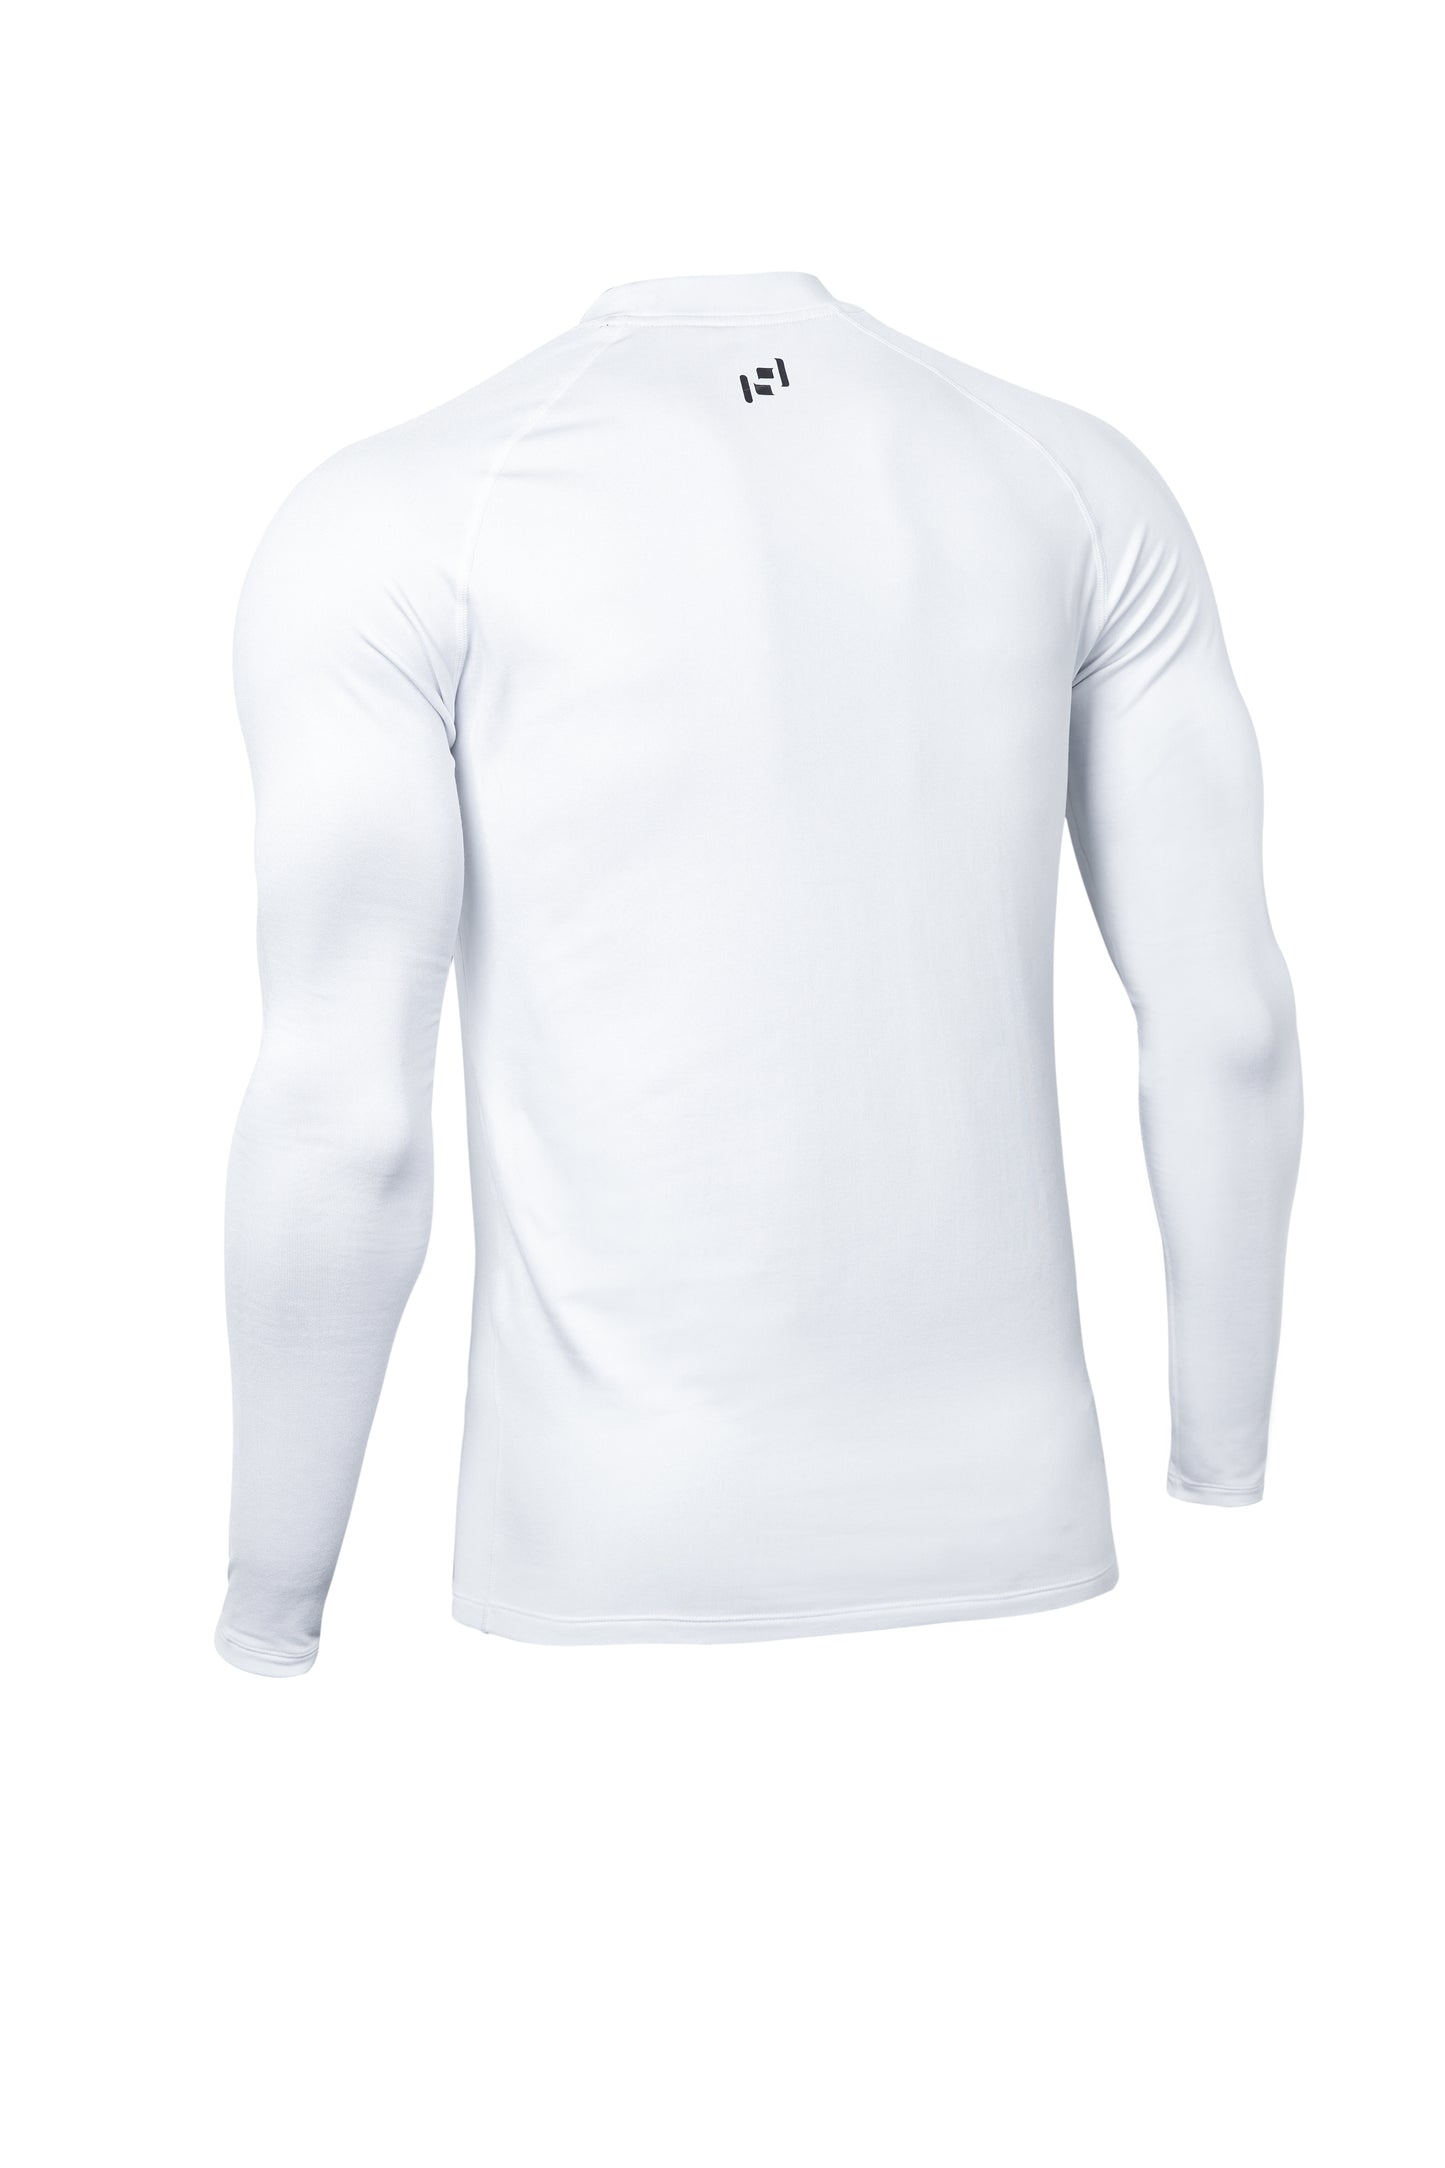 Essential Thermal Base Layer Shirt White